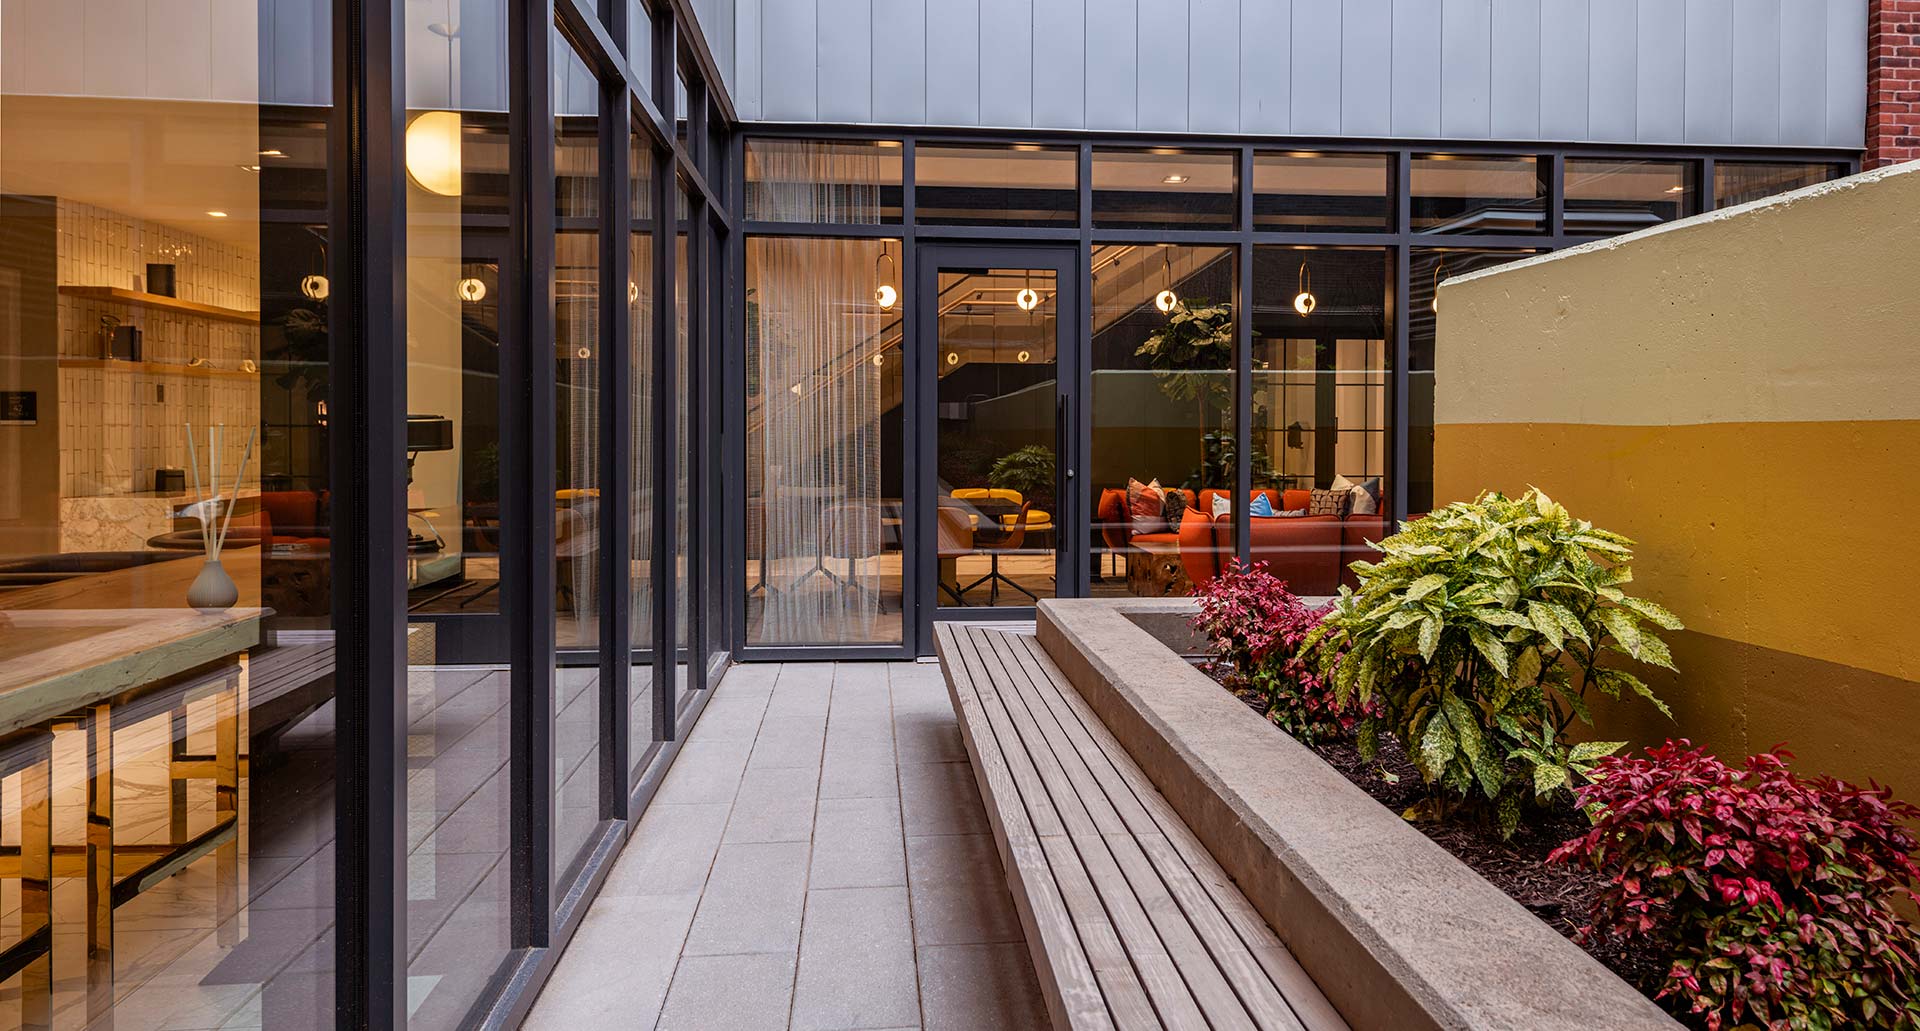 interior courtyard with bench seating and plants